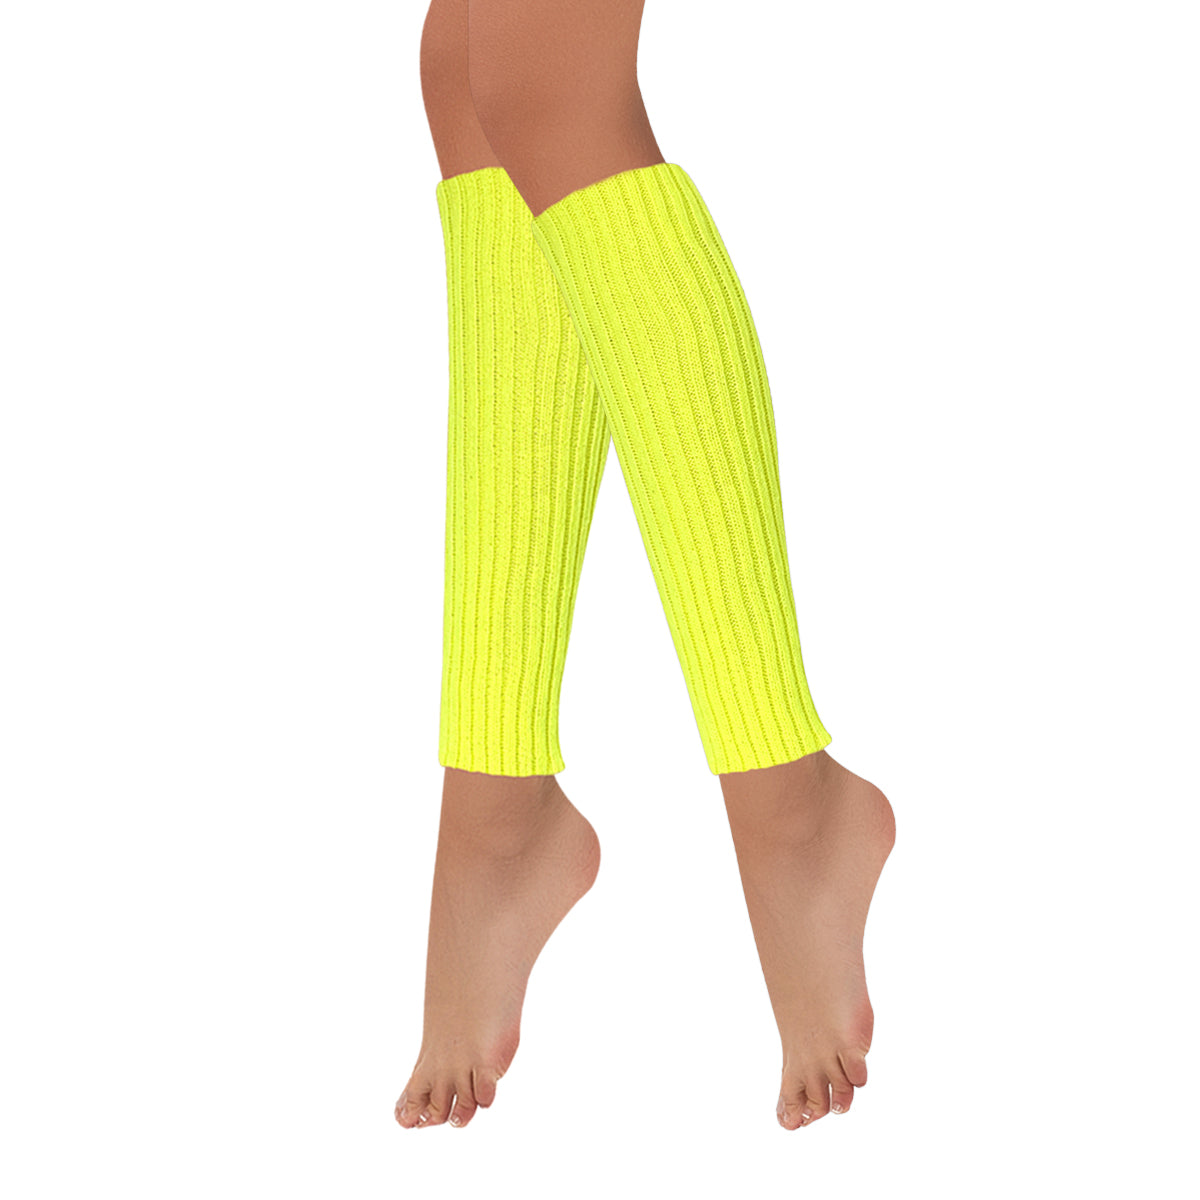 Wrapables 80's Style Neon Fluorescent Ribbed Leg Warmers